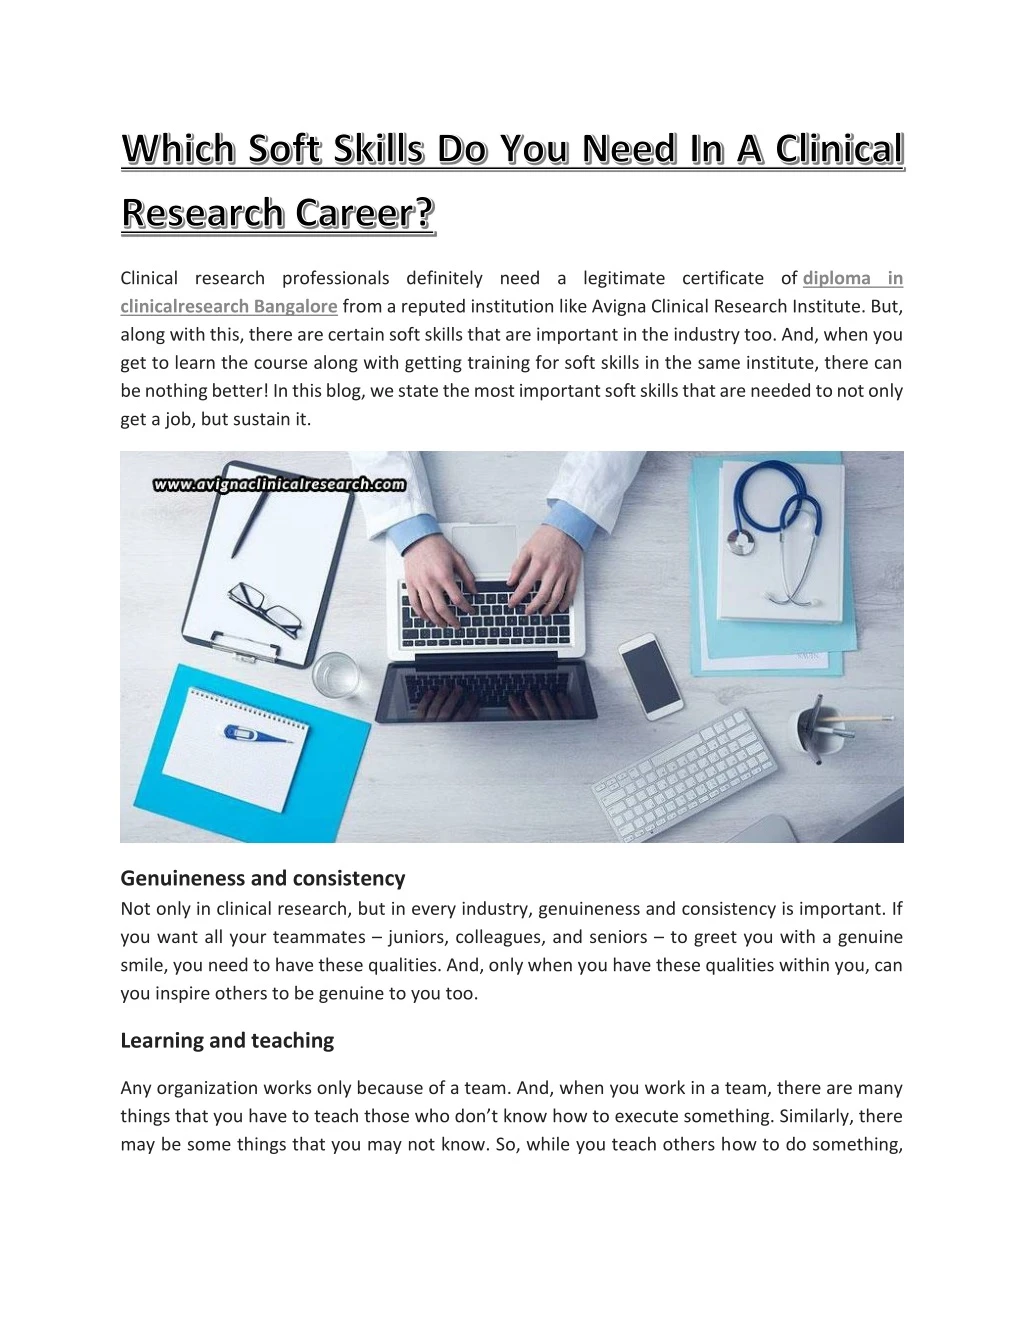 clinical research professionals definitely need